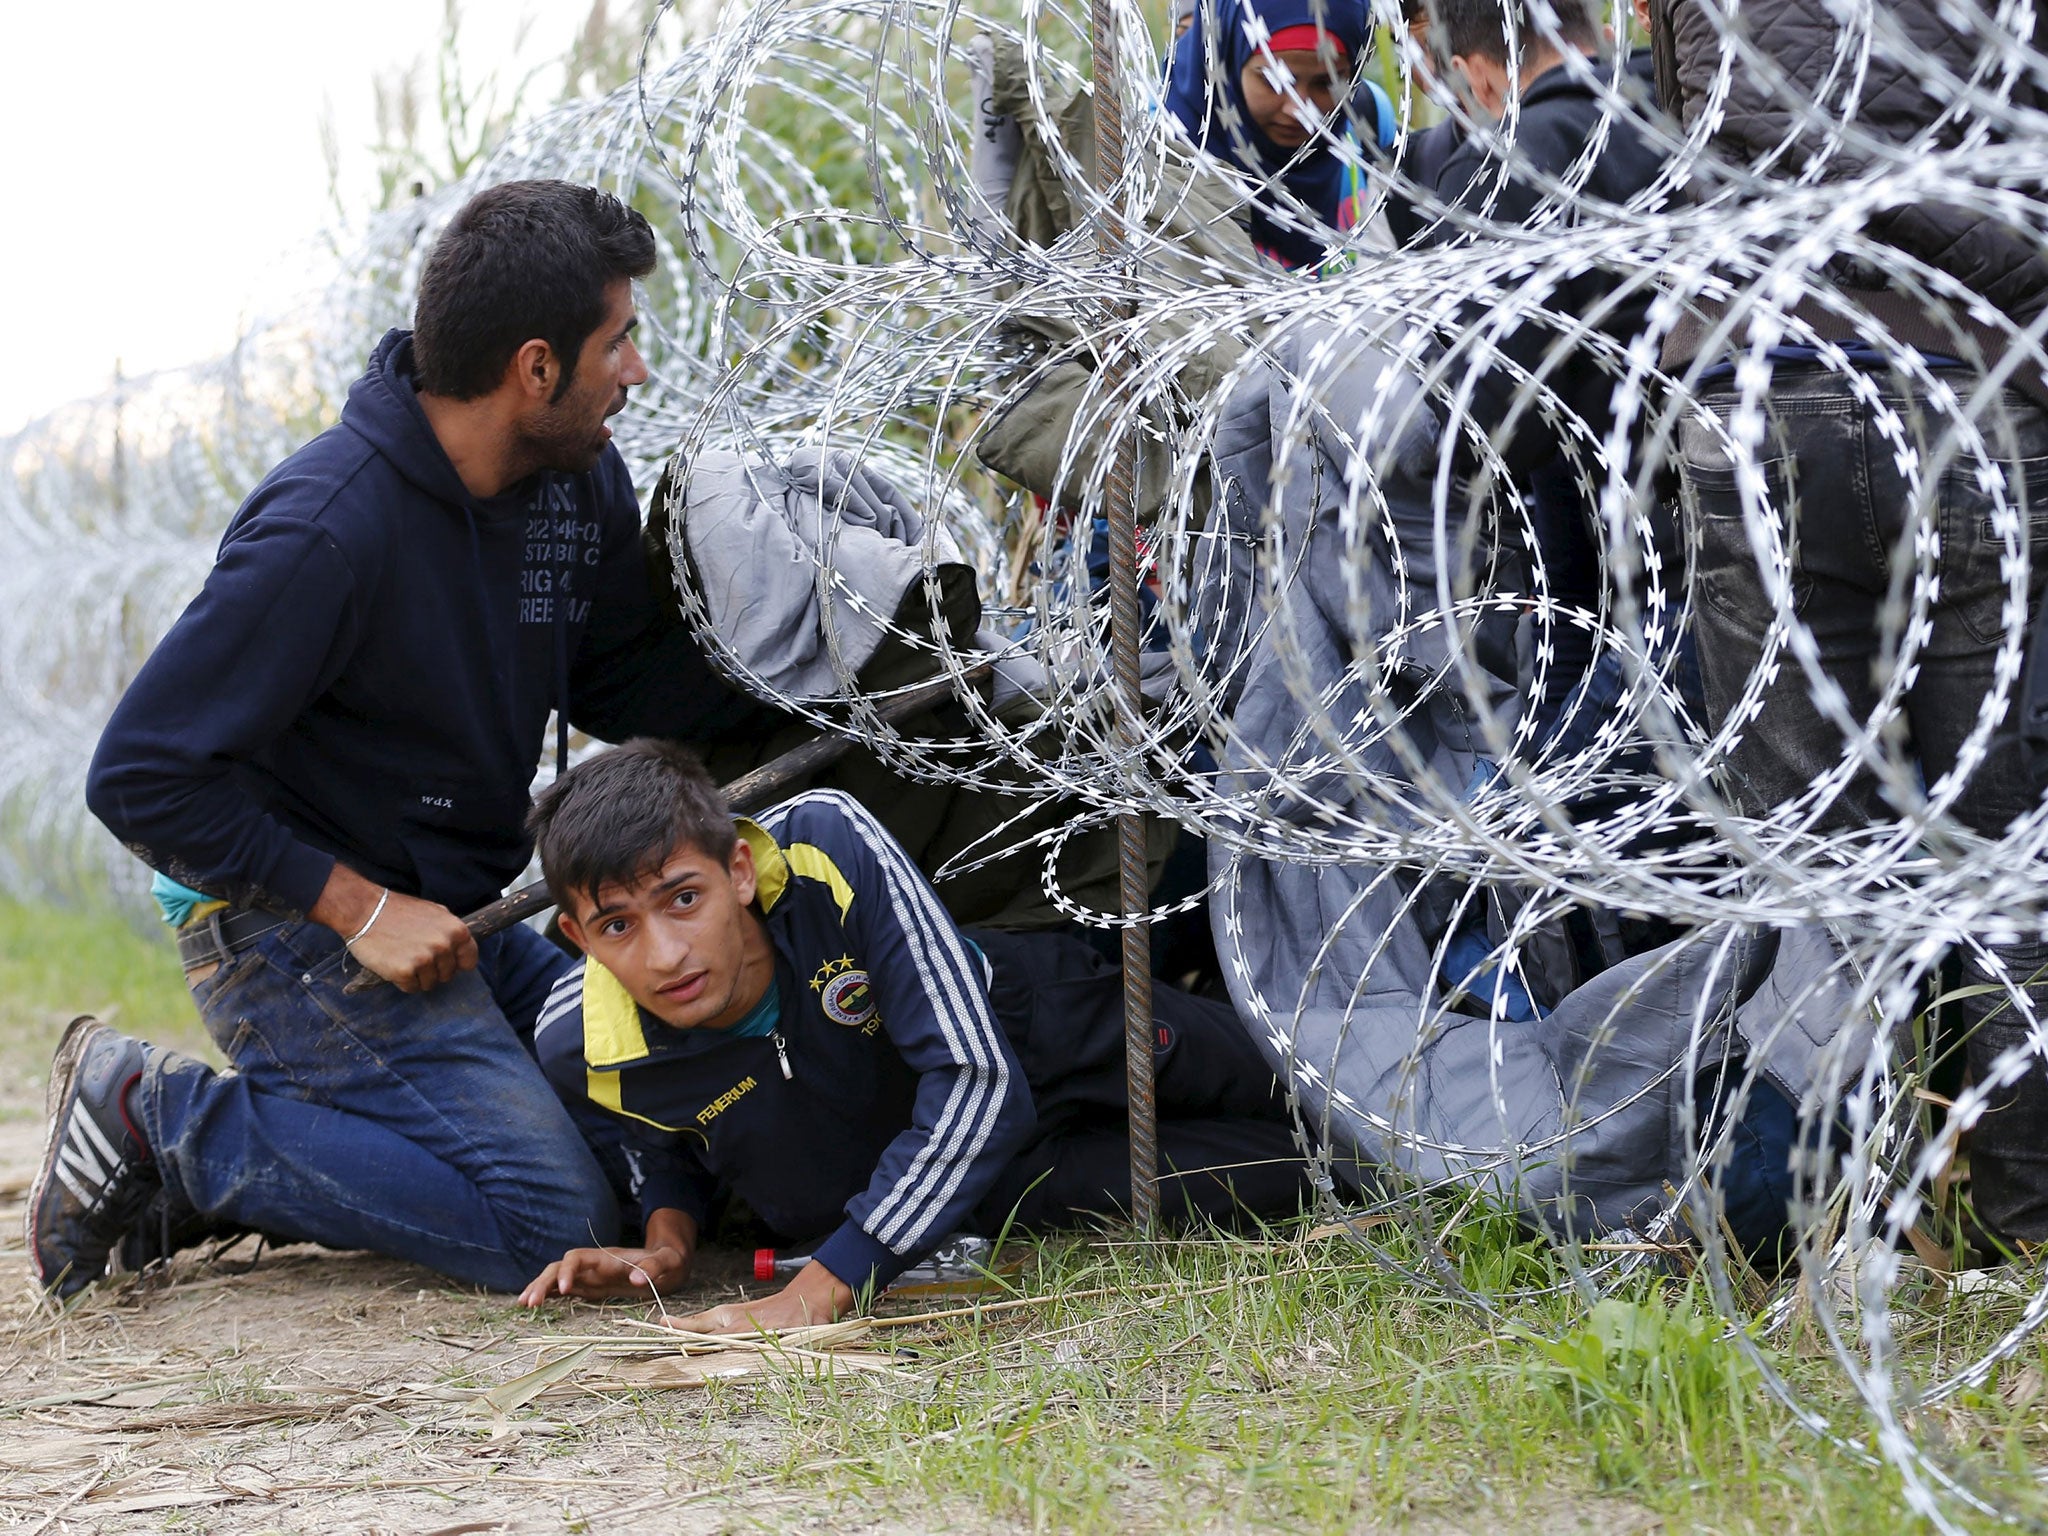 Syrian migrants cross under a fence into Hungary at the border with Serbia, near Roszke, 26 August, 2015